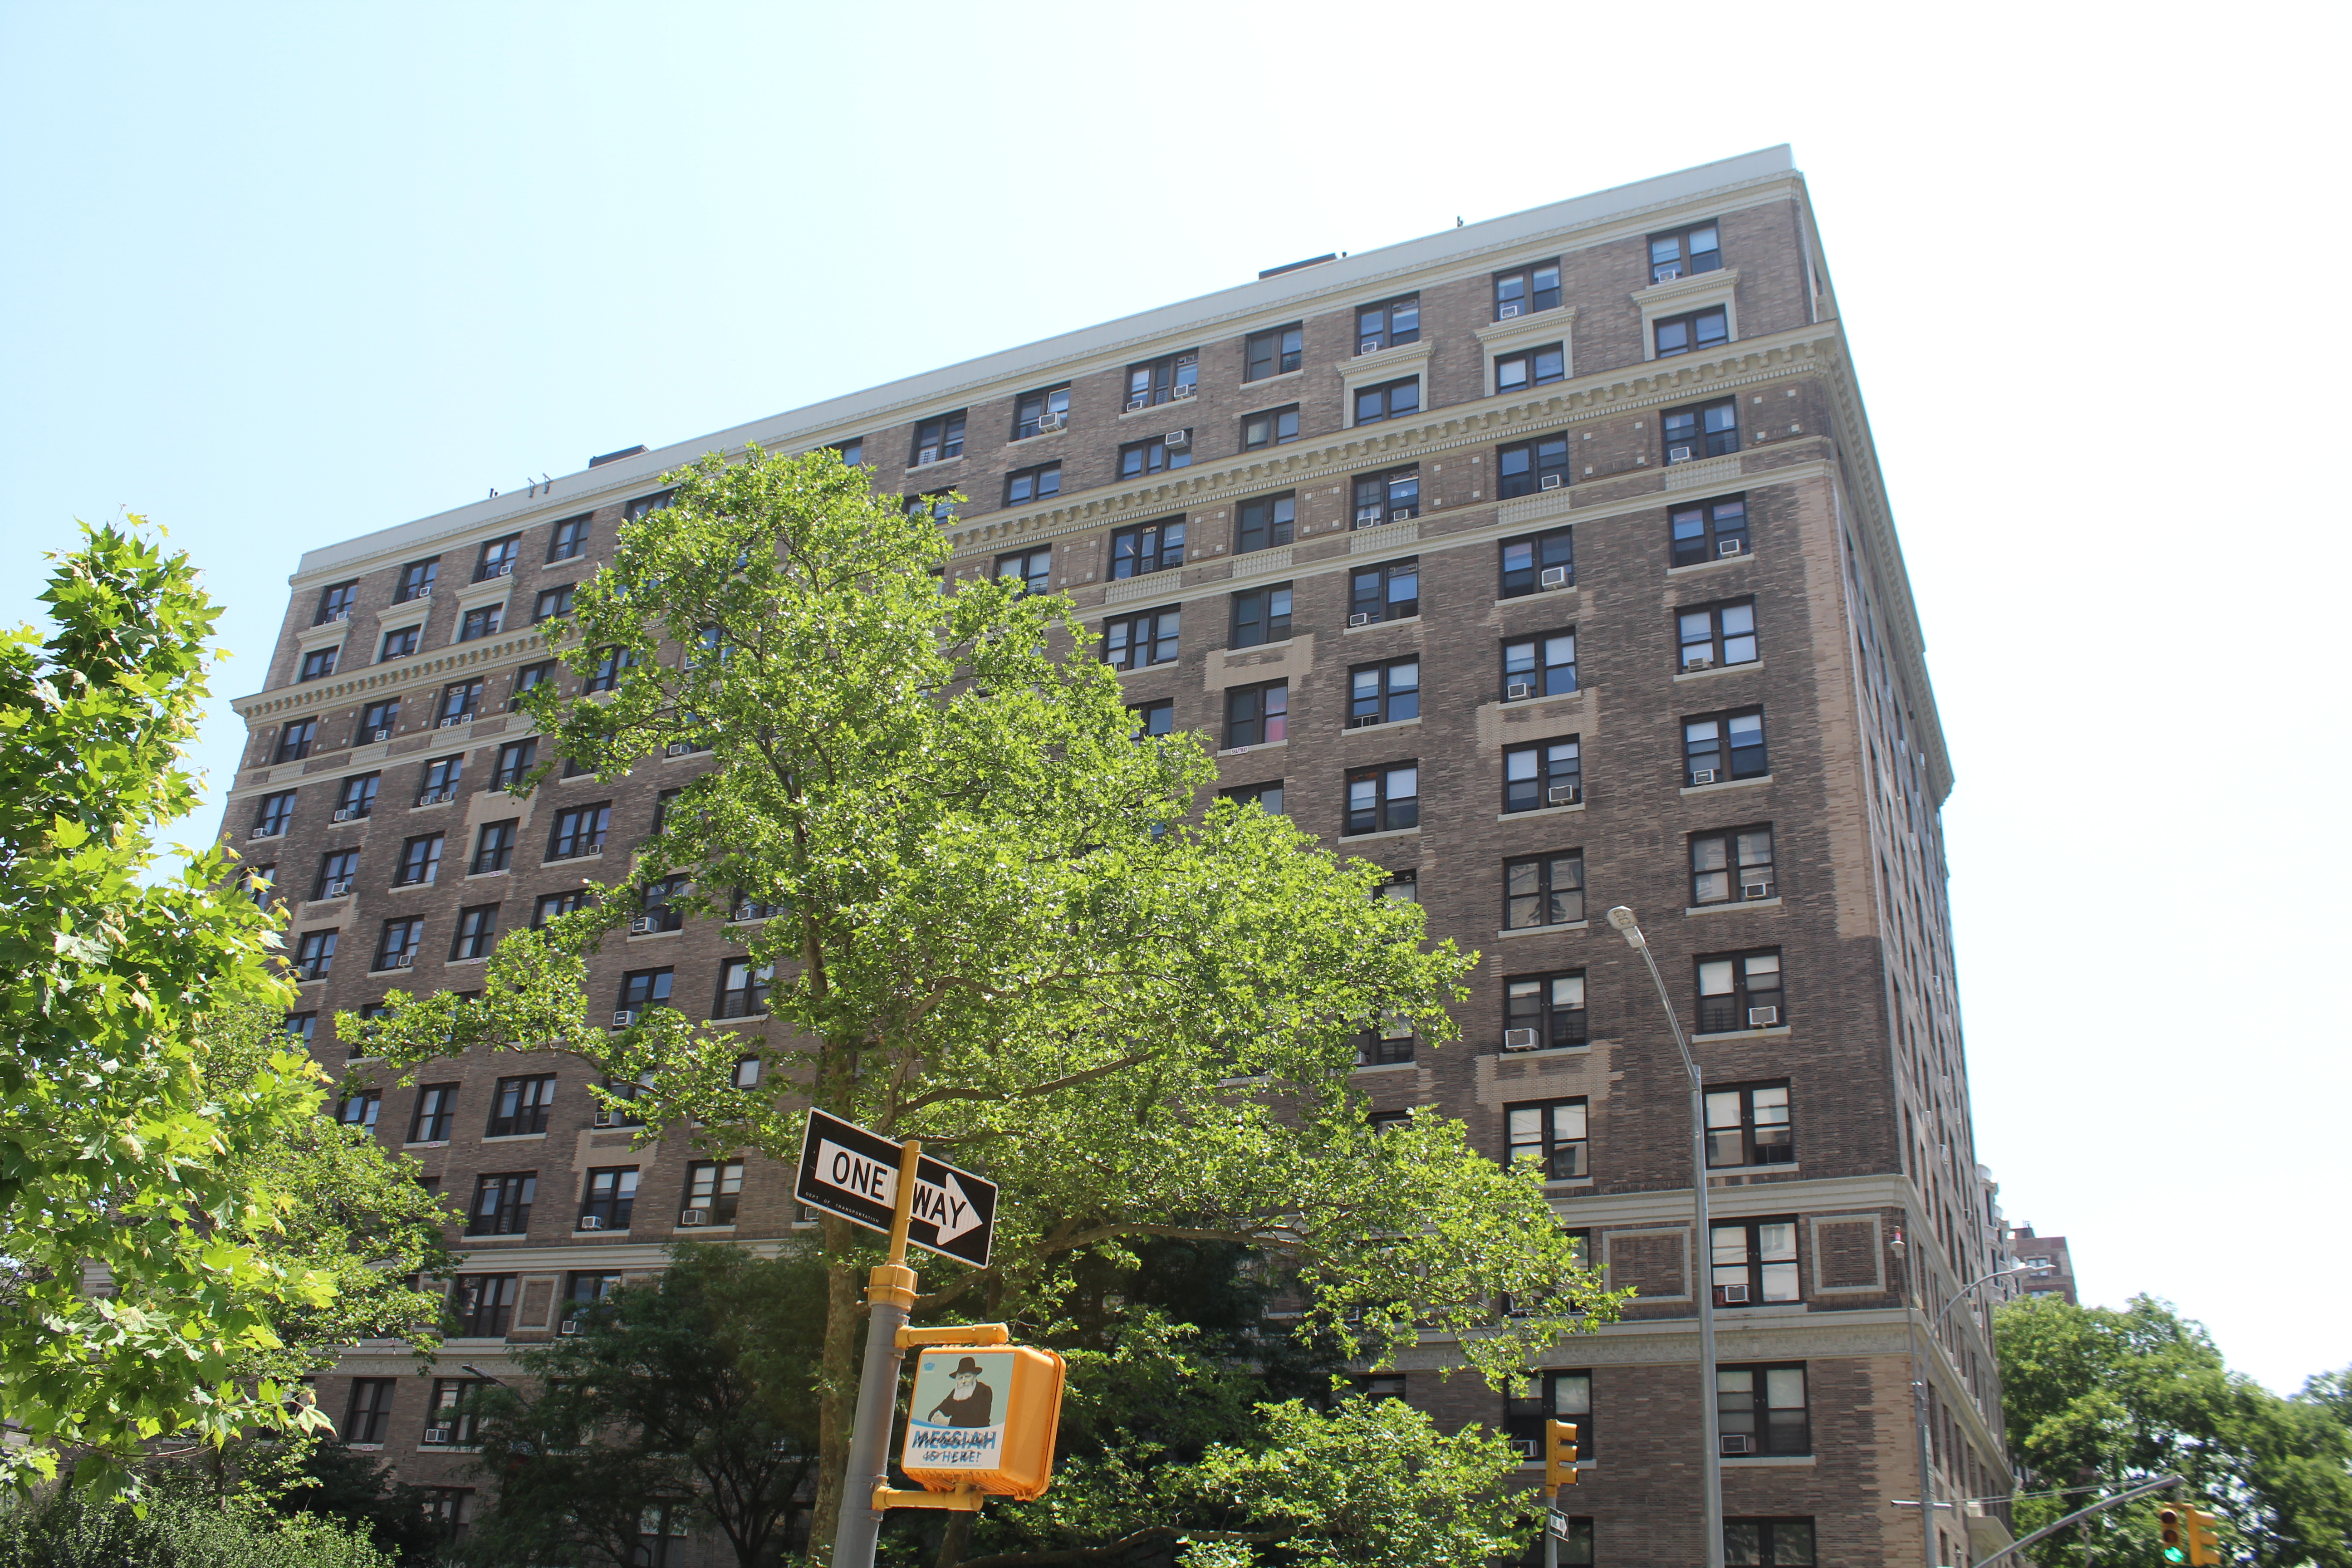 2200-2208 Broadway, AKA 227-229 West 79th Street, 230 West 78th Street: The Sanford & The Rexford